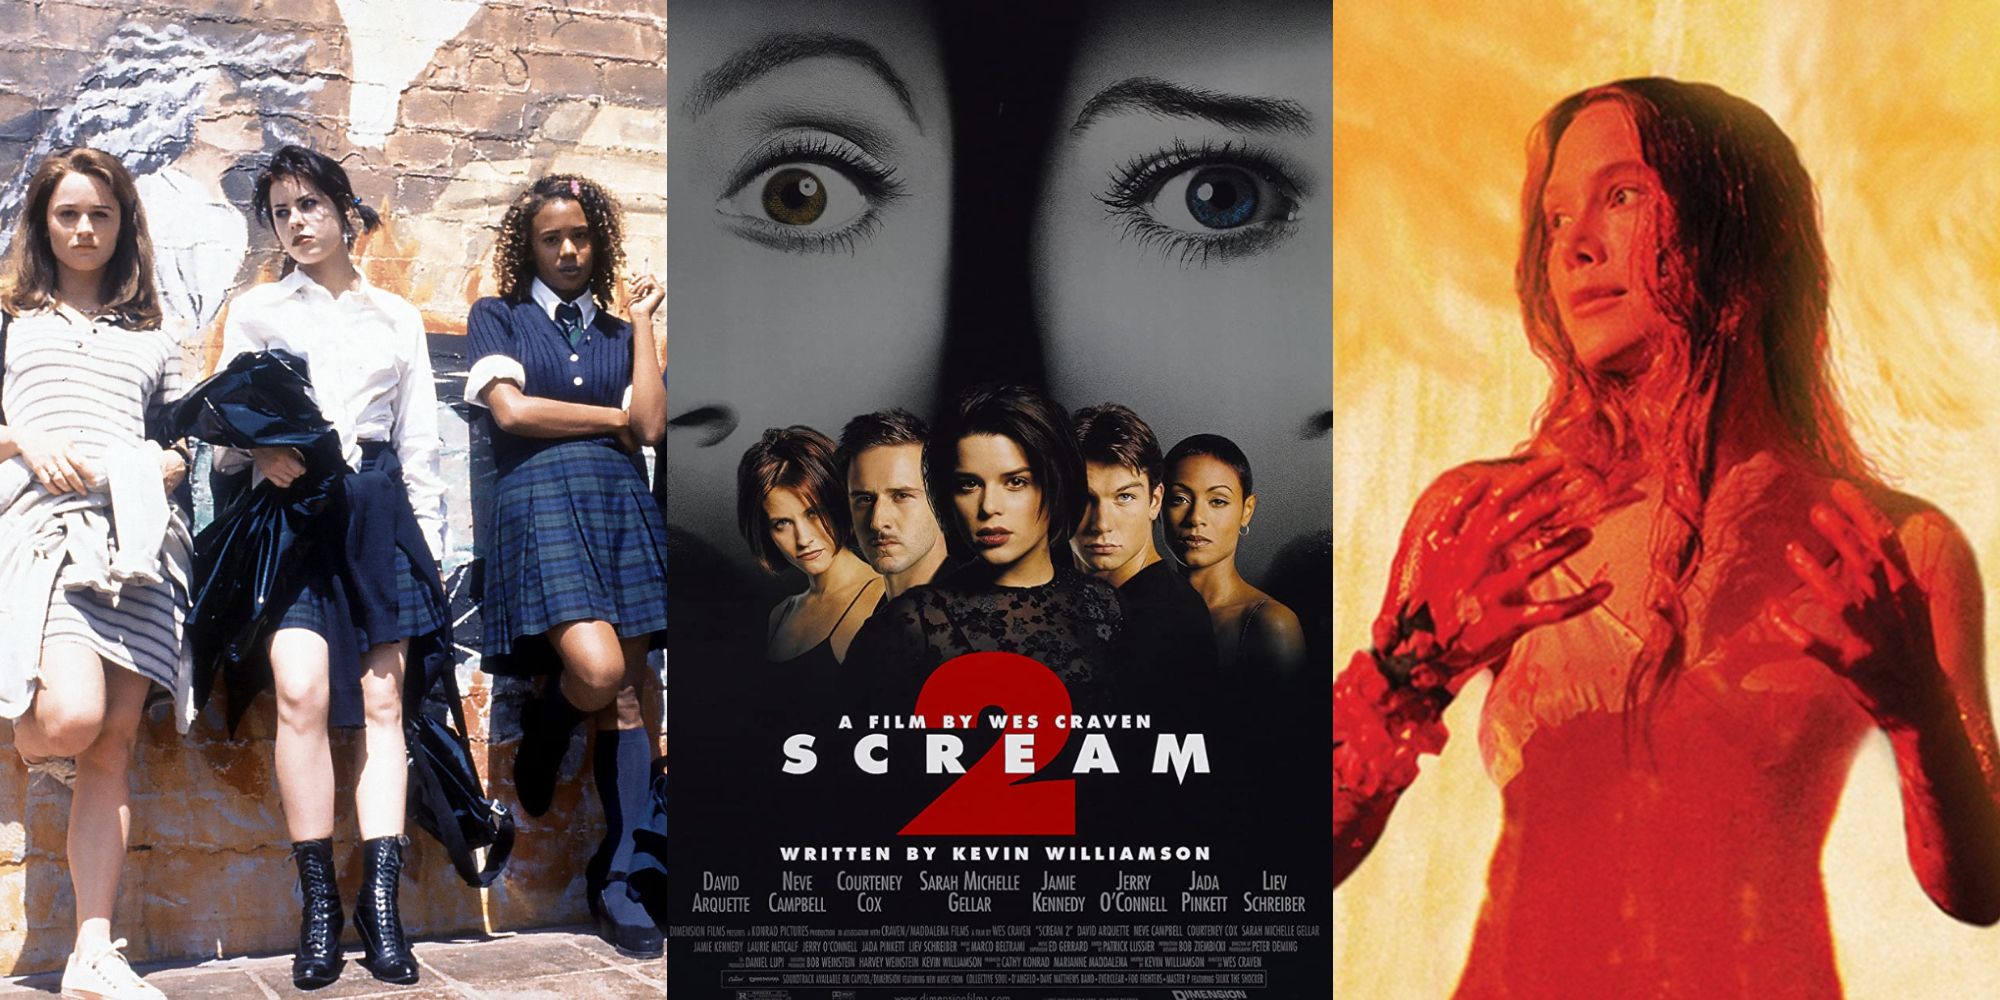 Stills from The Craft, Scream 2, and Carrie